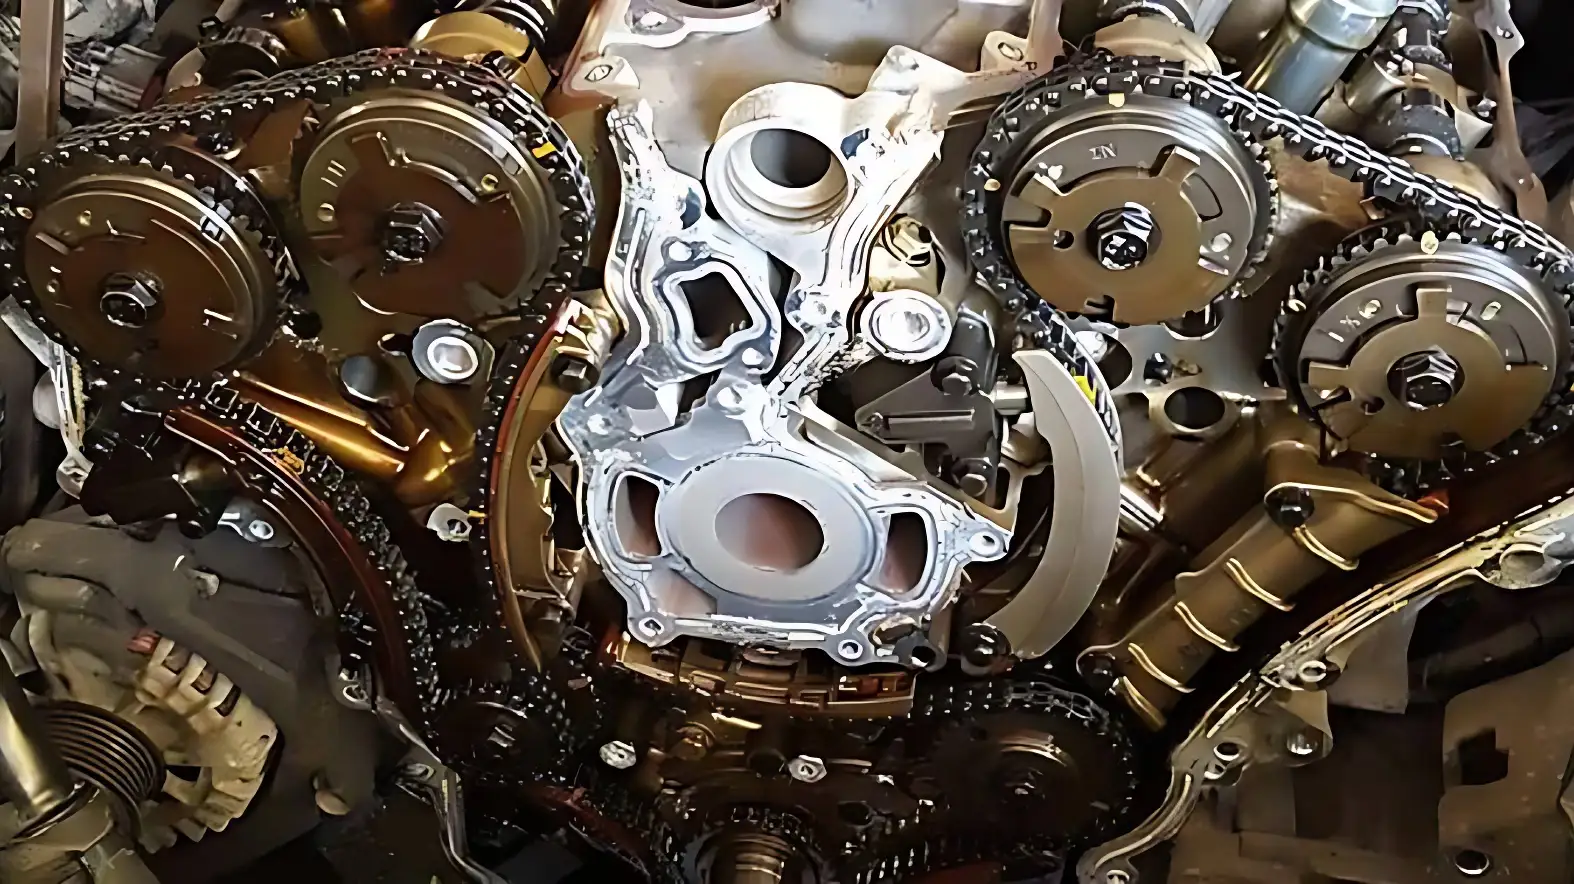 Did Gm Fix 3.6 Timing Chain Issue